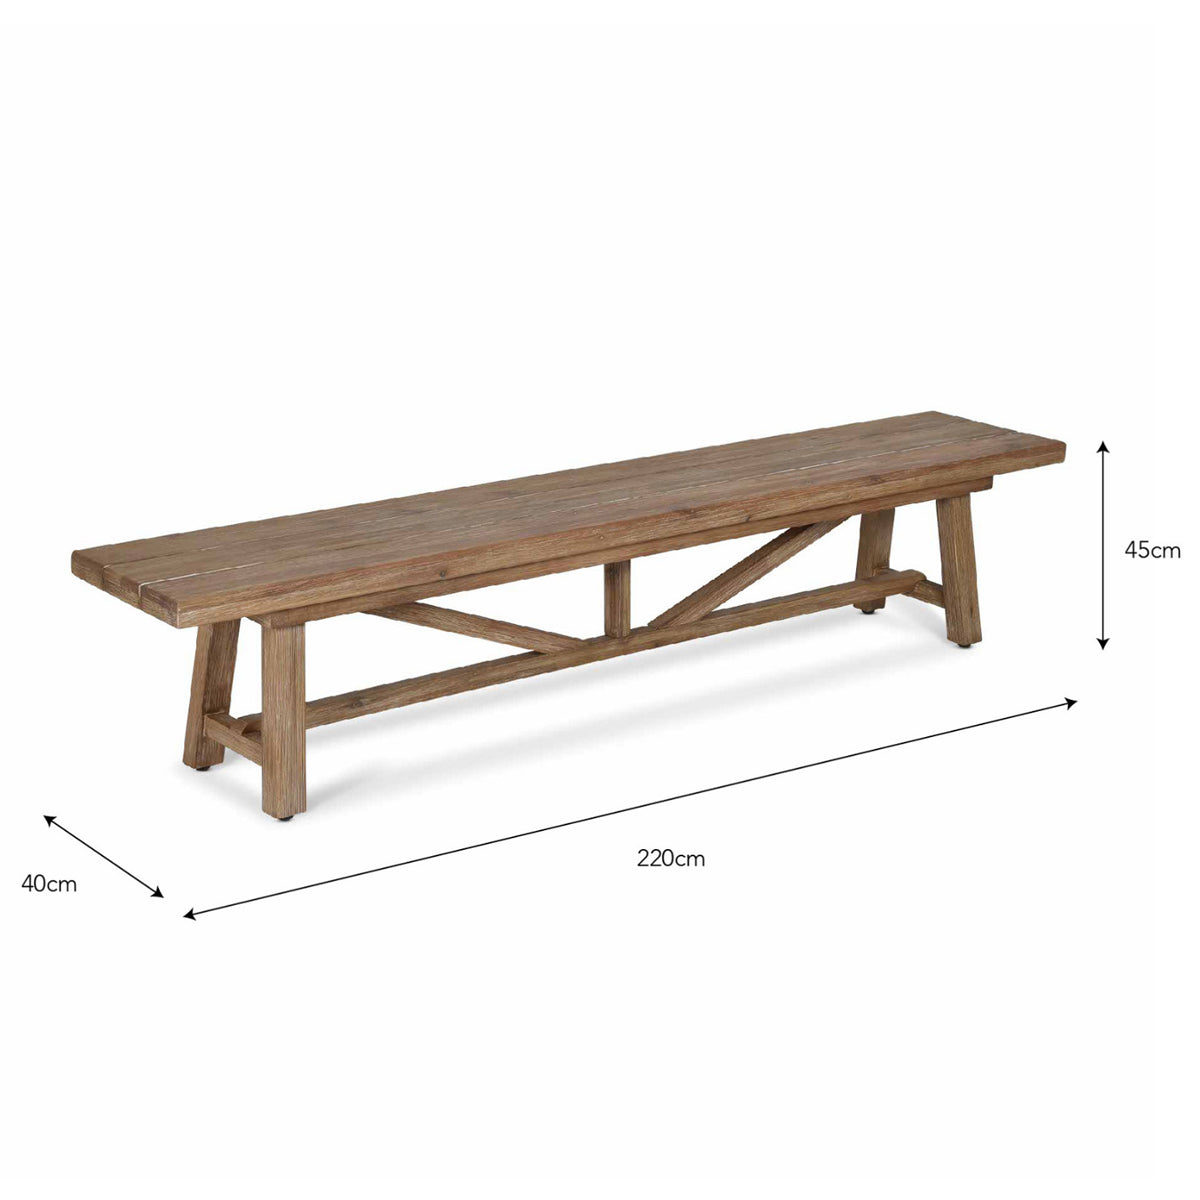 Chilford Wooden Bench Two Sizes